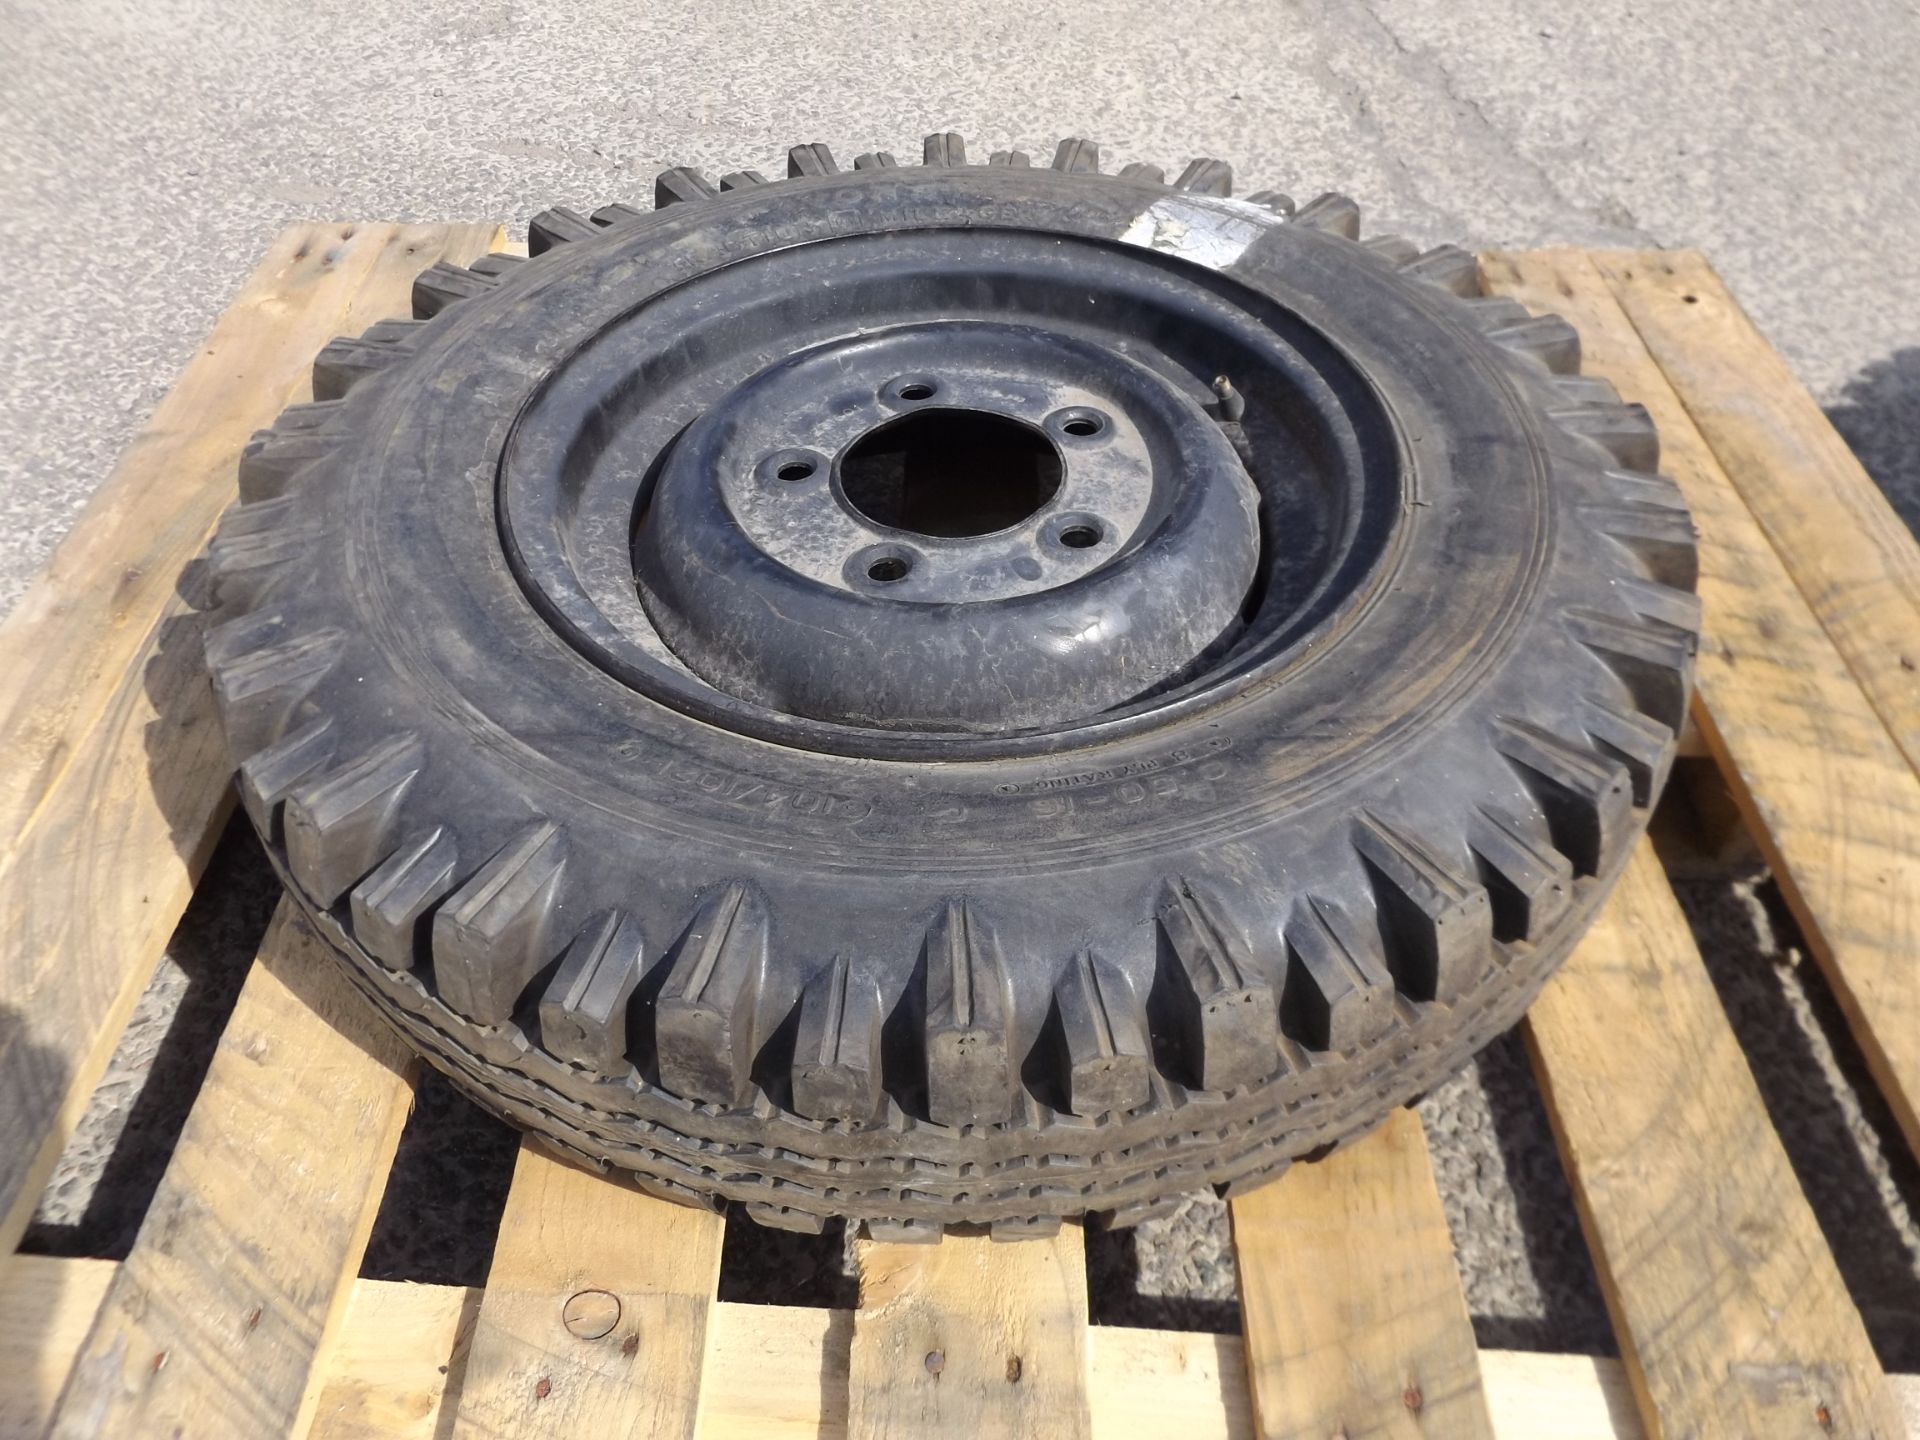 The Holy Grail of Tyres, 1 x Avon Traction Mileage 6.50 x 16 8 Ply Tyre complete with 5 stud rim